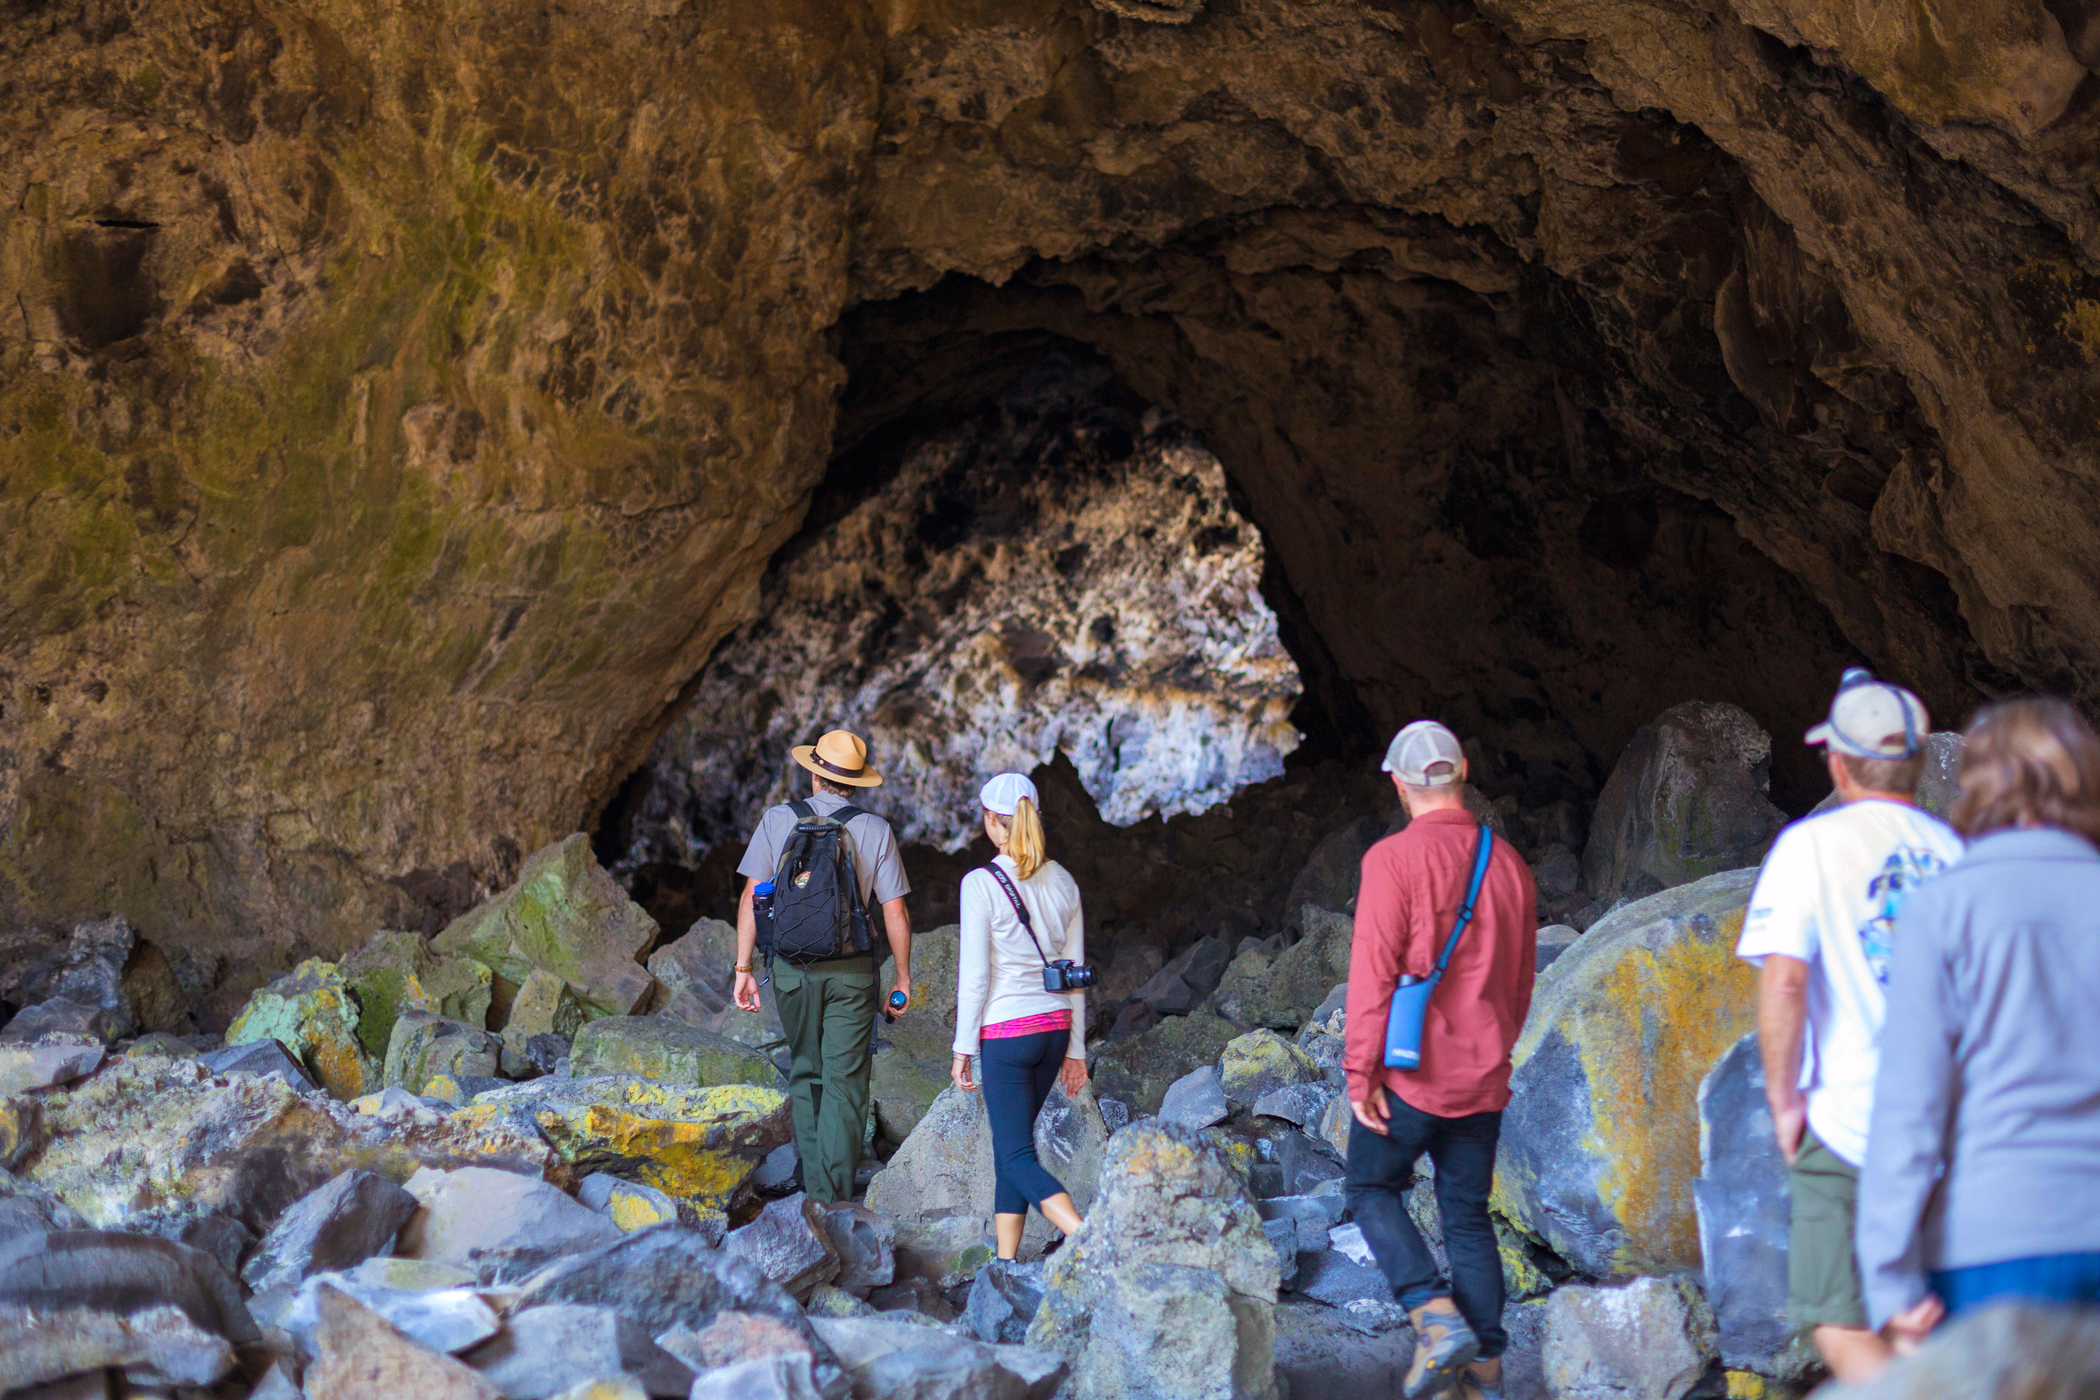 A lava tube at Craters of the Moon Park